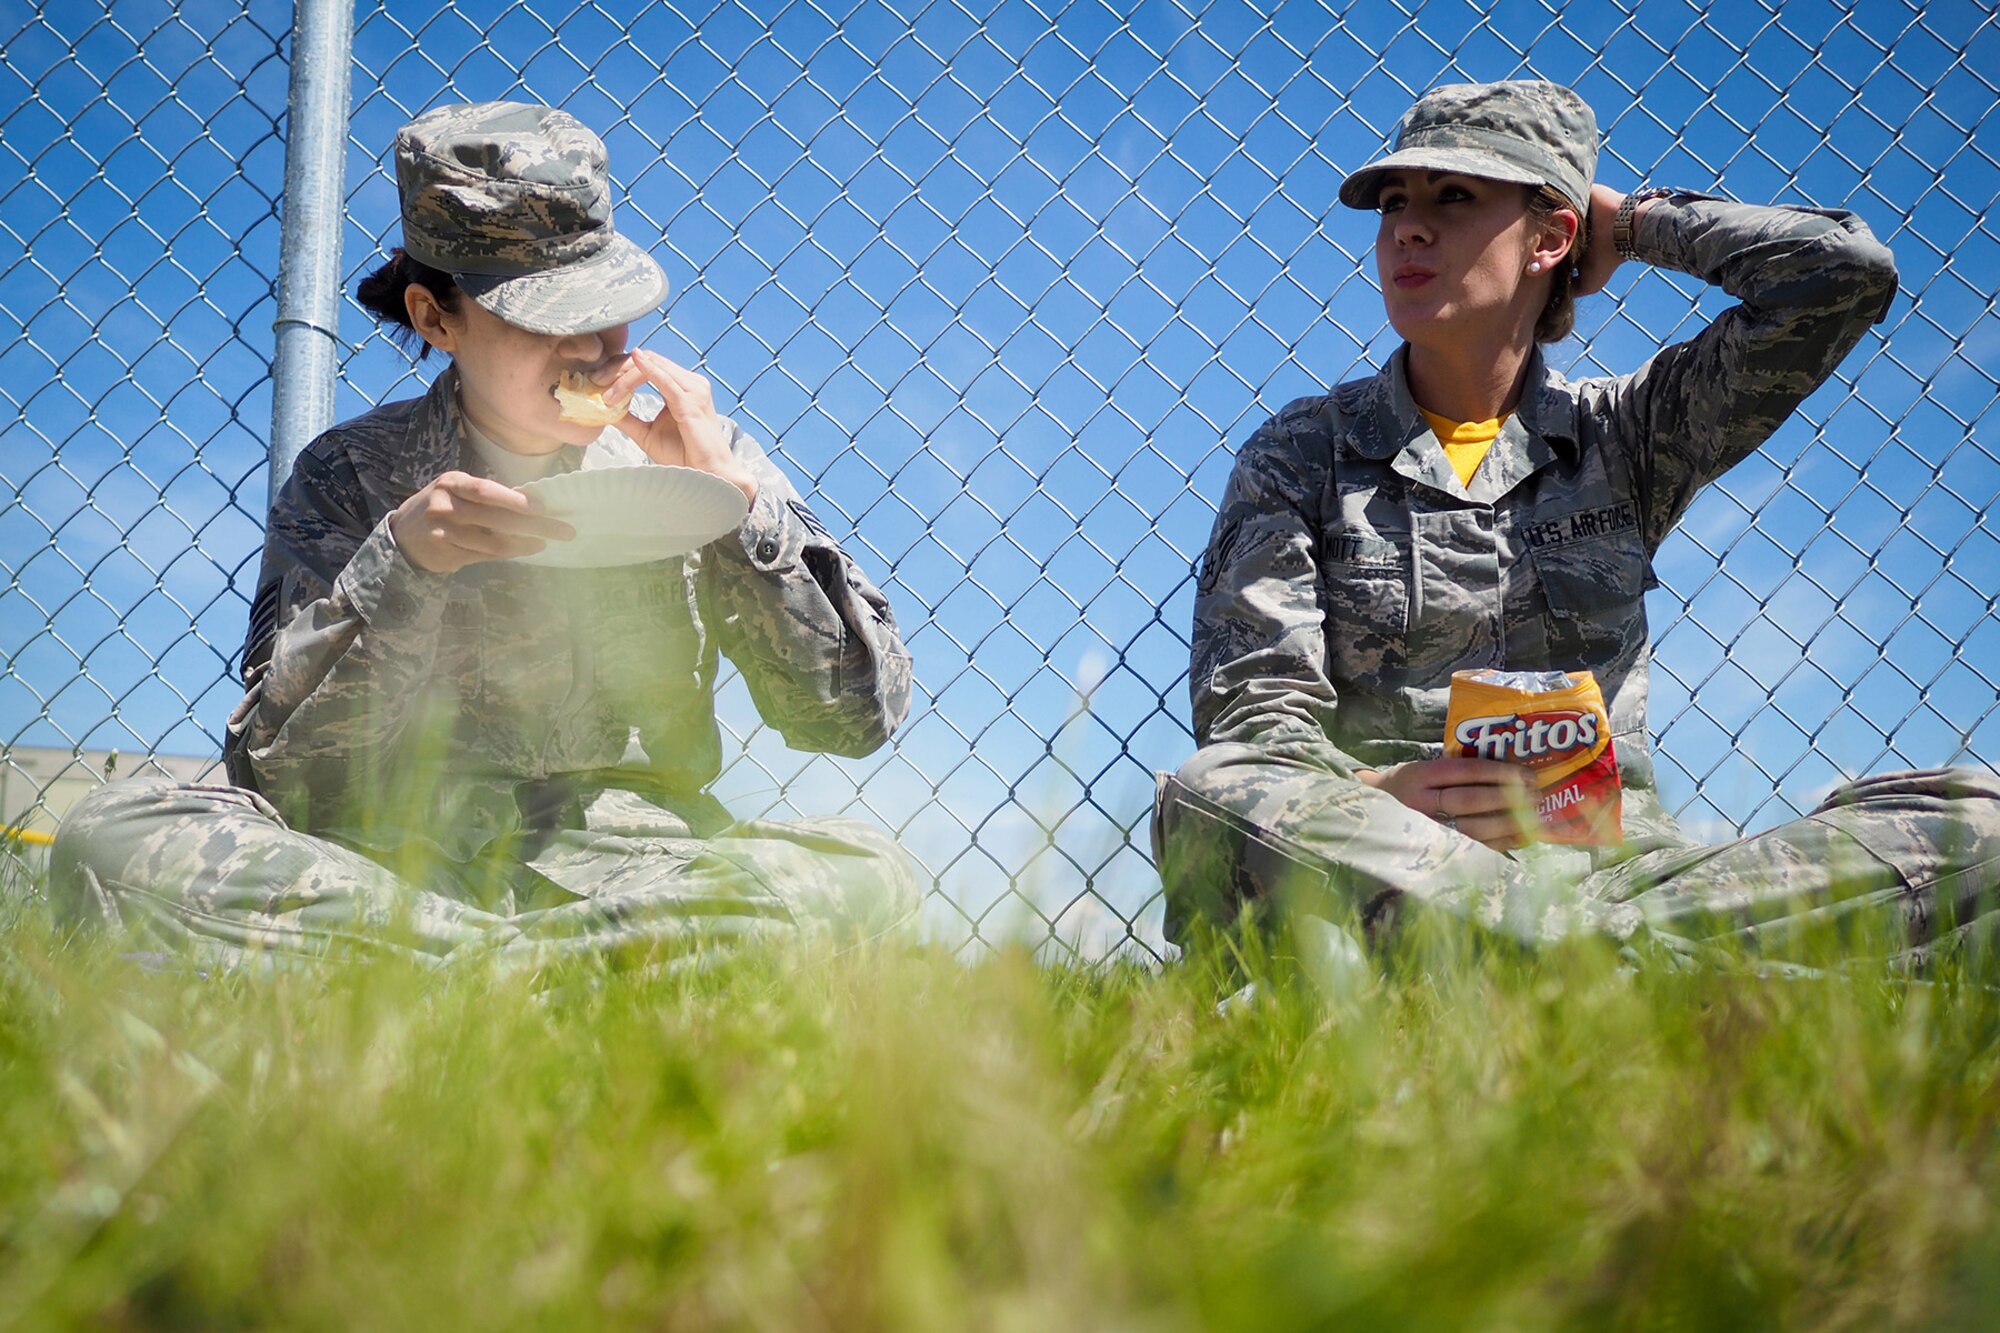 Air Force Staff Sgt. Ana Escobar-Willacey, and Airman 1st Class Kimberly Mott, both assigned to the 673rd Medical Group, enjoy food at the Military Appreciation Week picnic at the Joint Base Elmendorf-Richardson, Alaska, Buckner Fitness Center fields June 16, 2017. Several organizations came together to provide a variety of family-fun activities such as competitive sporting events for the adults, face painting and bouncy houses for the children in addition to the Anchorage Chamber of Commerce-provided food and music during the annual event.